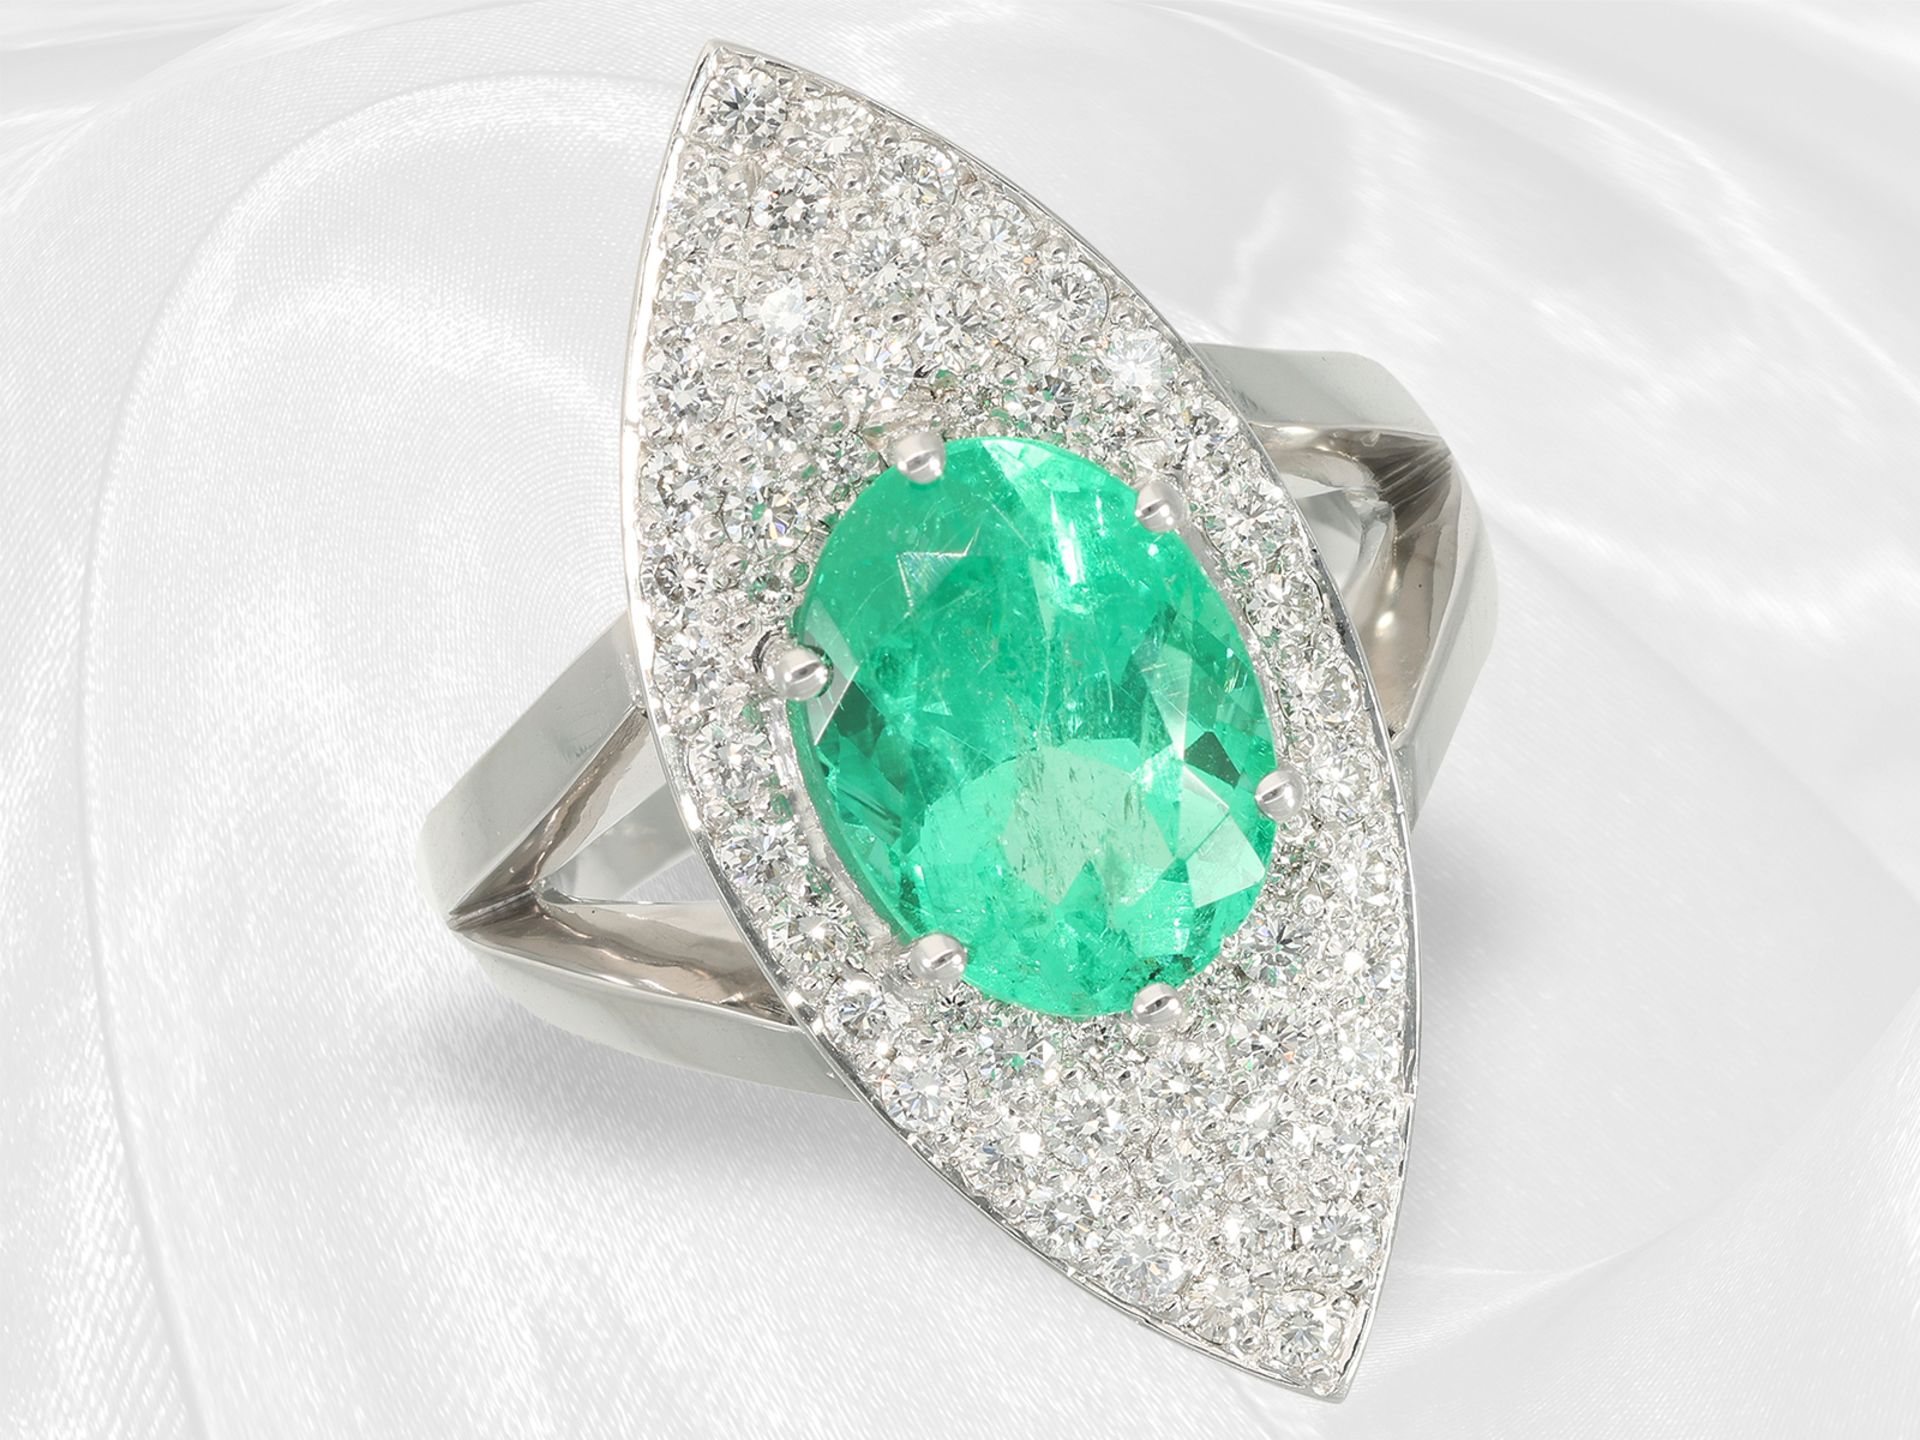 Formerly very expensive emerald/brilliant-cut diamond goldsmith ring with Colombian top quality emer - Image 6 of 7